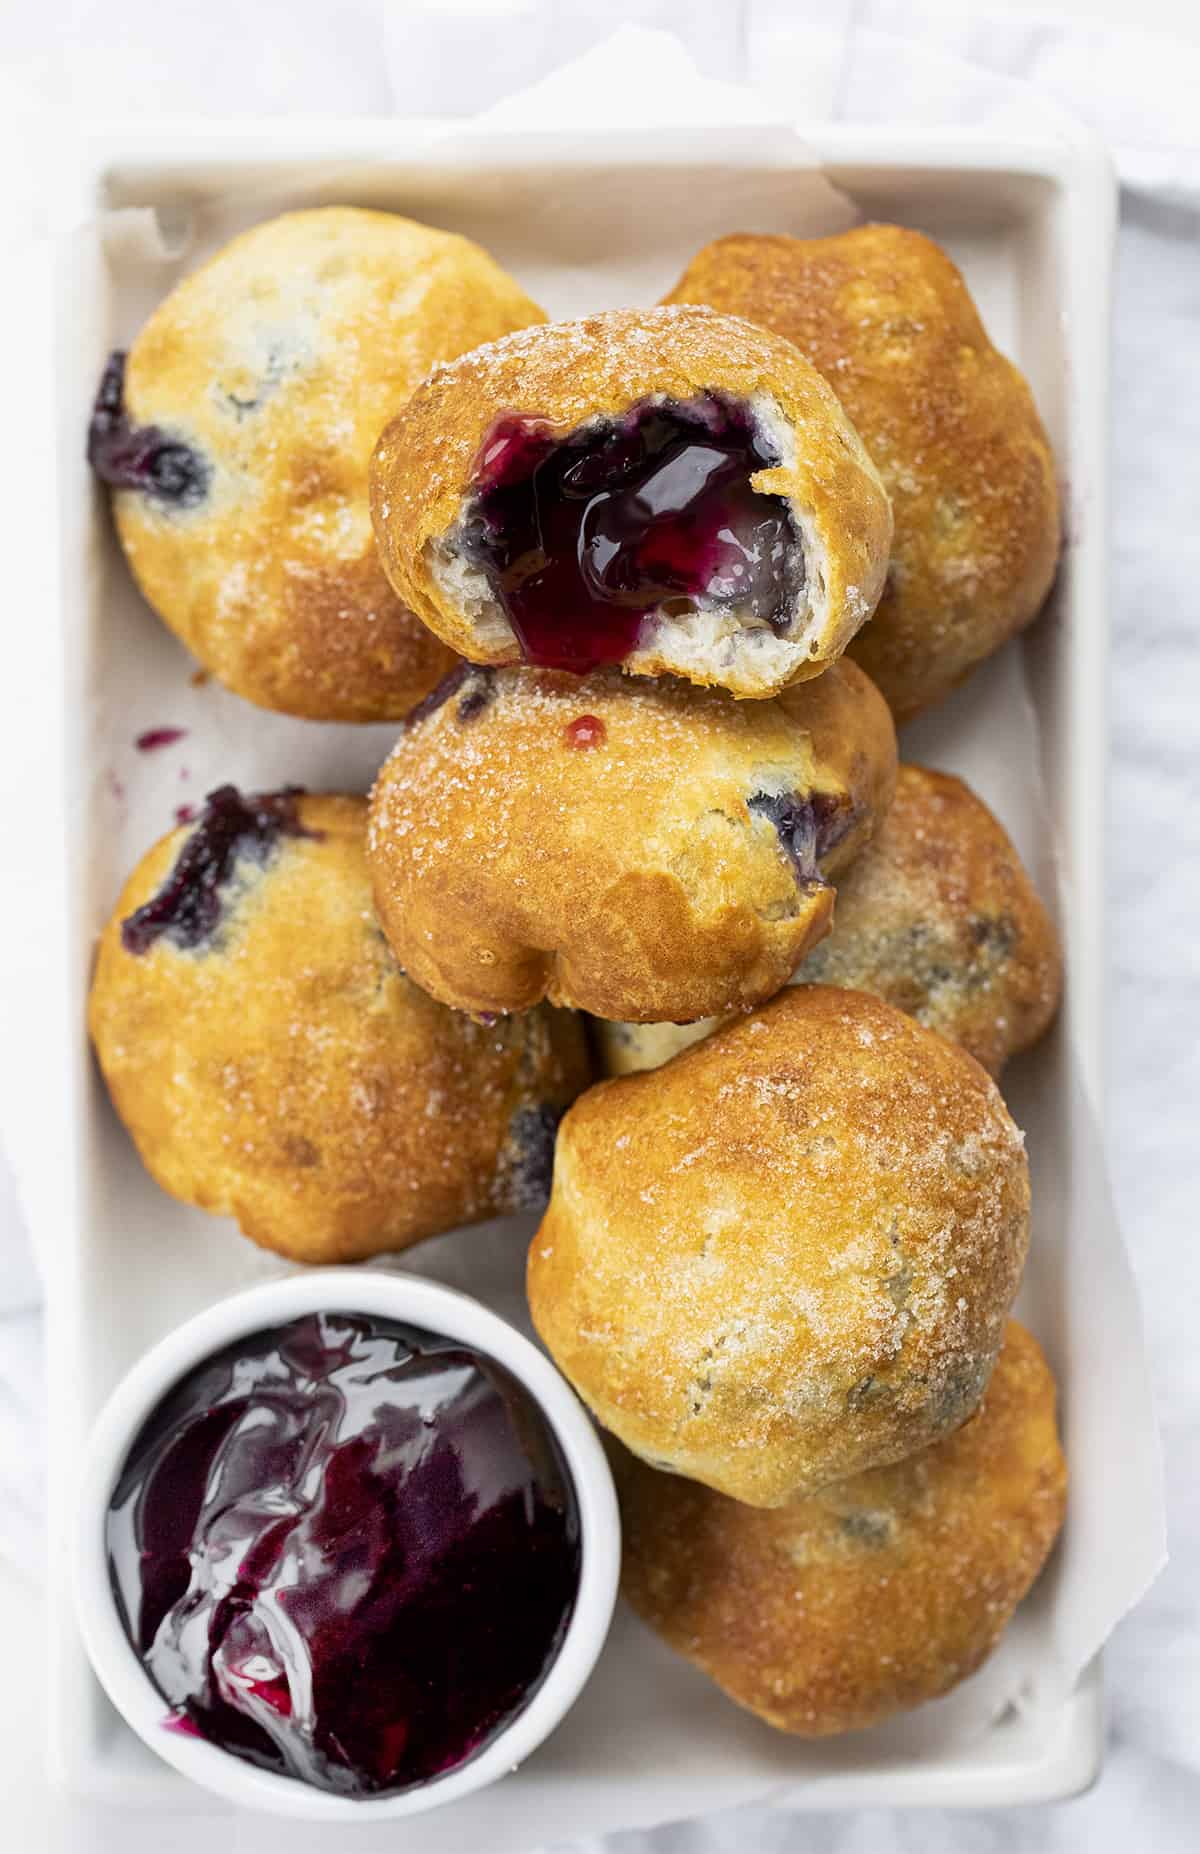 Tray of Blueberry Pie Bombs with One Cut Open. Breakfast, Blueberry Pie Bombs, Fruit Filled Hand Pies, Air Fryer Recipes, Blueberry Breakfast, Baked Blueberry Desserts, Dessert, Cherry Pie Bombs, Baked Pie Bombs, recipes, i am baker, iambaker